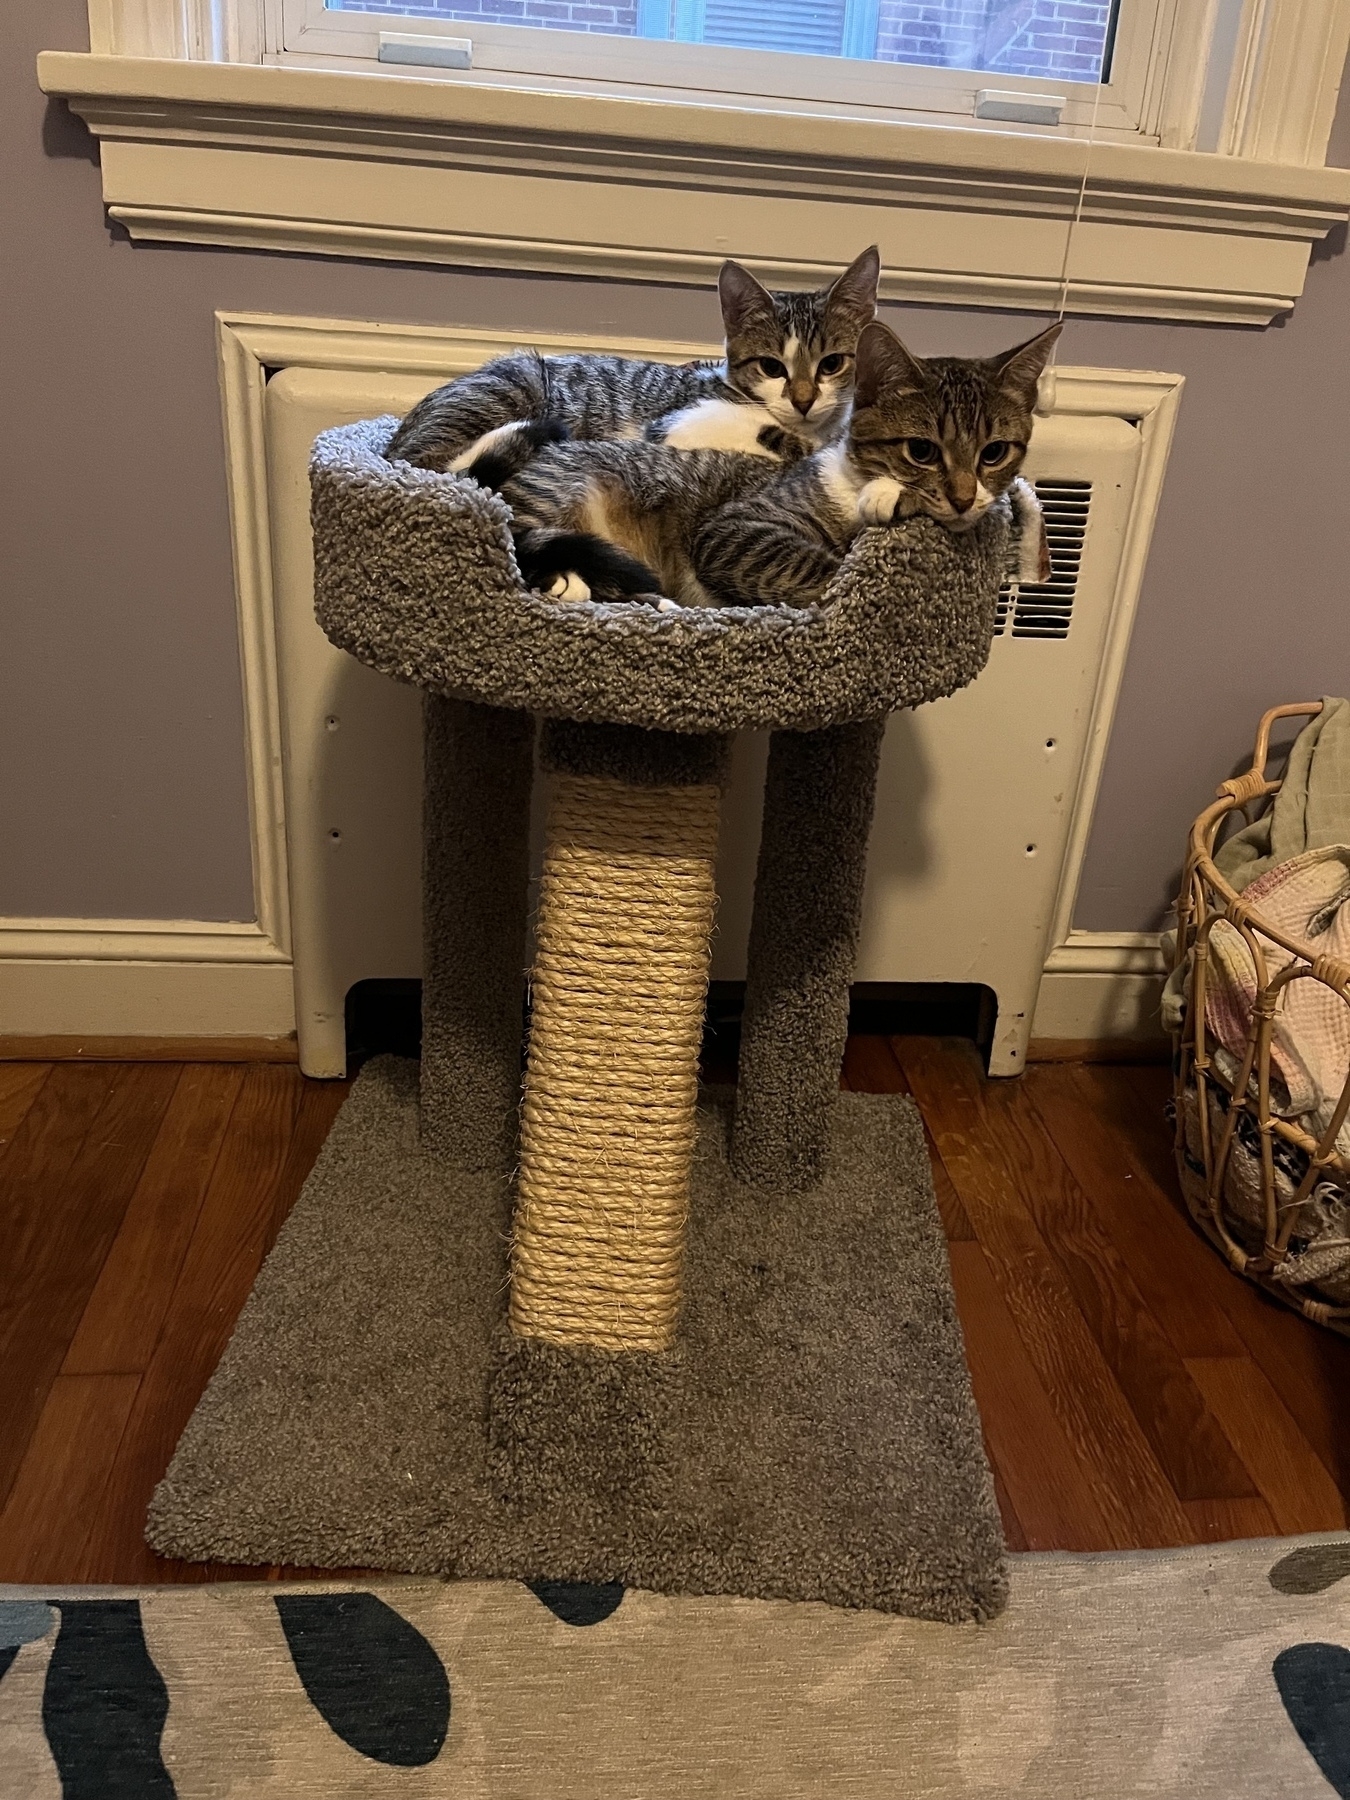 Two cute kittens cuddle together in a cat tree.